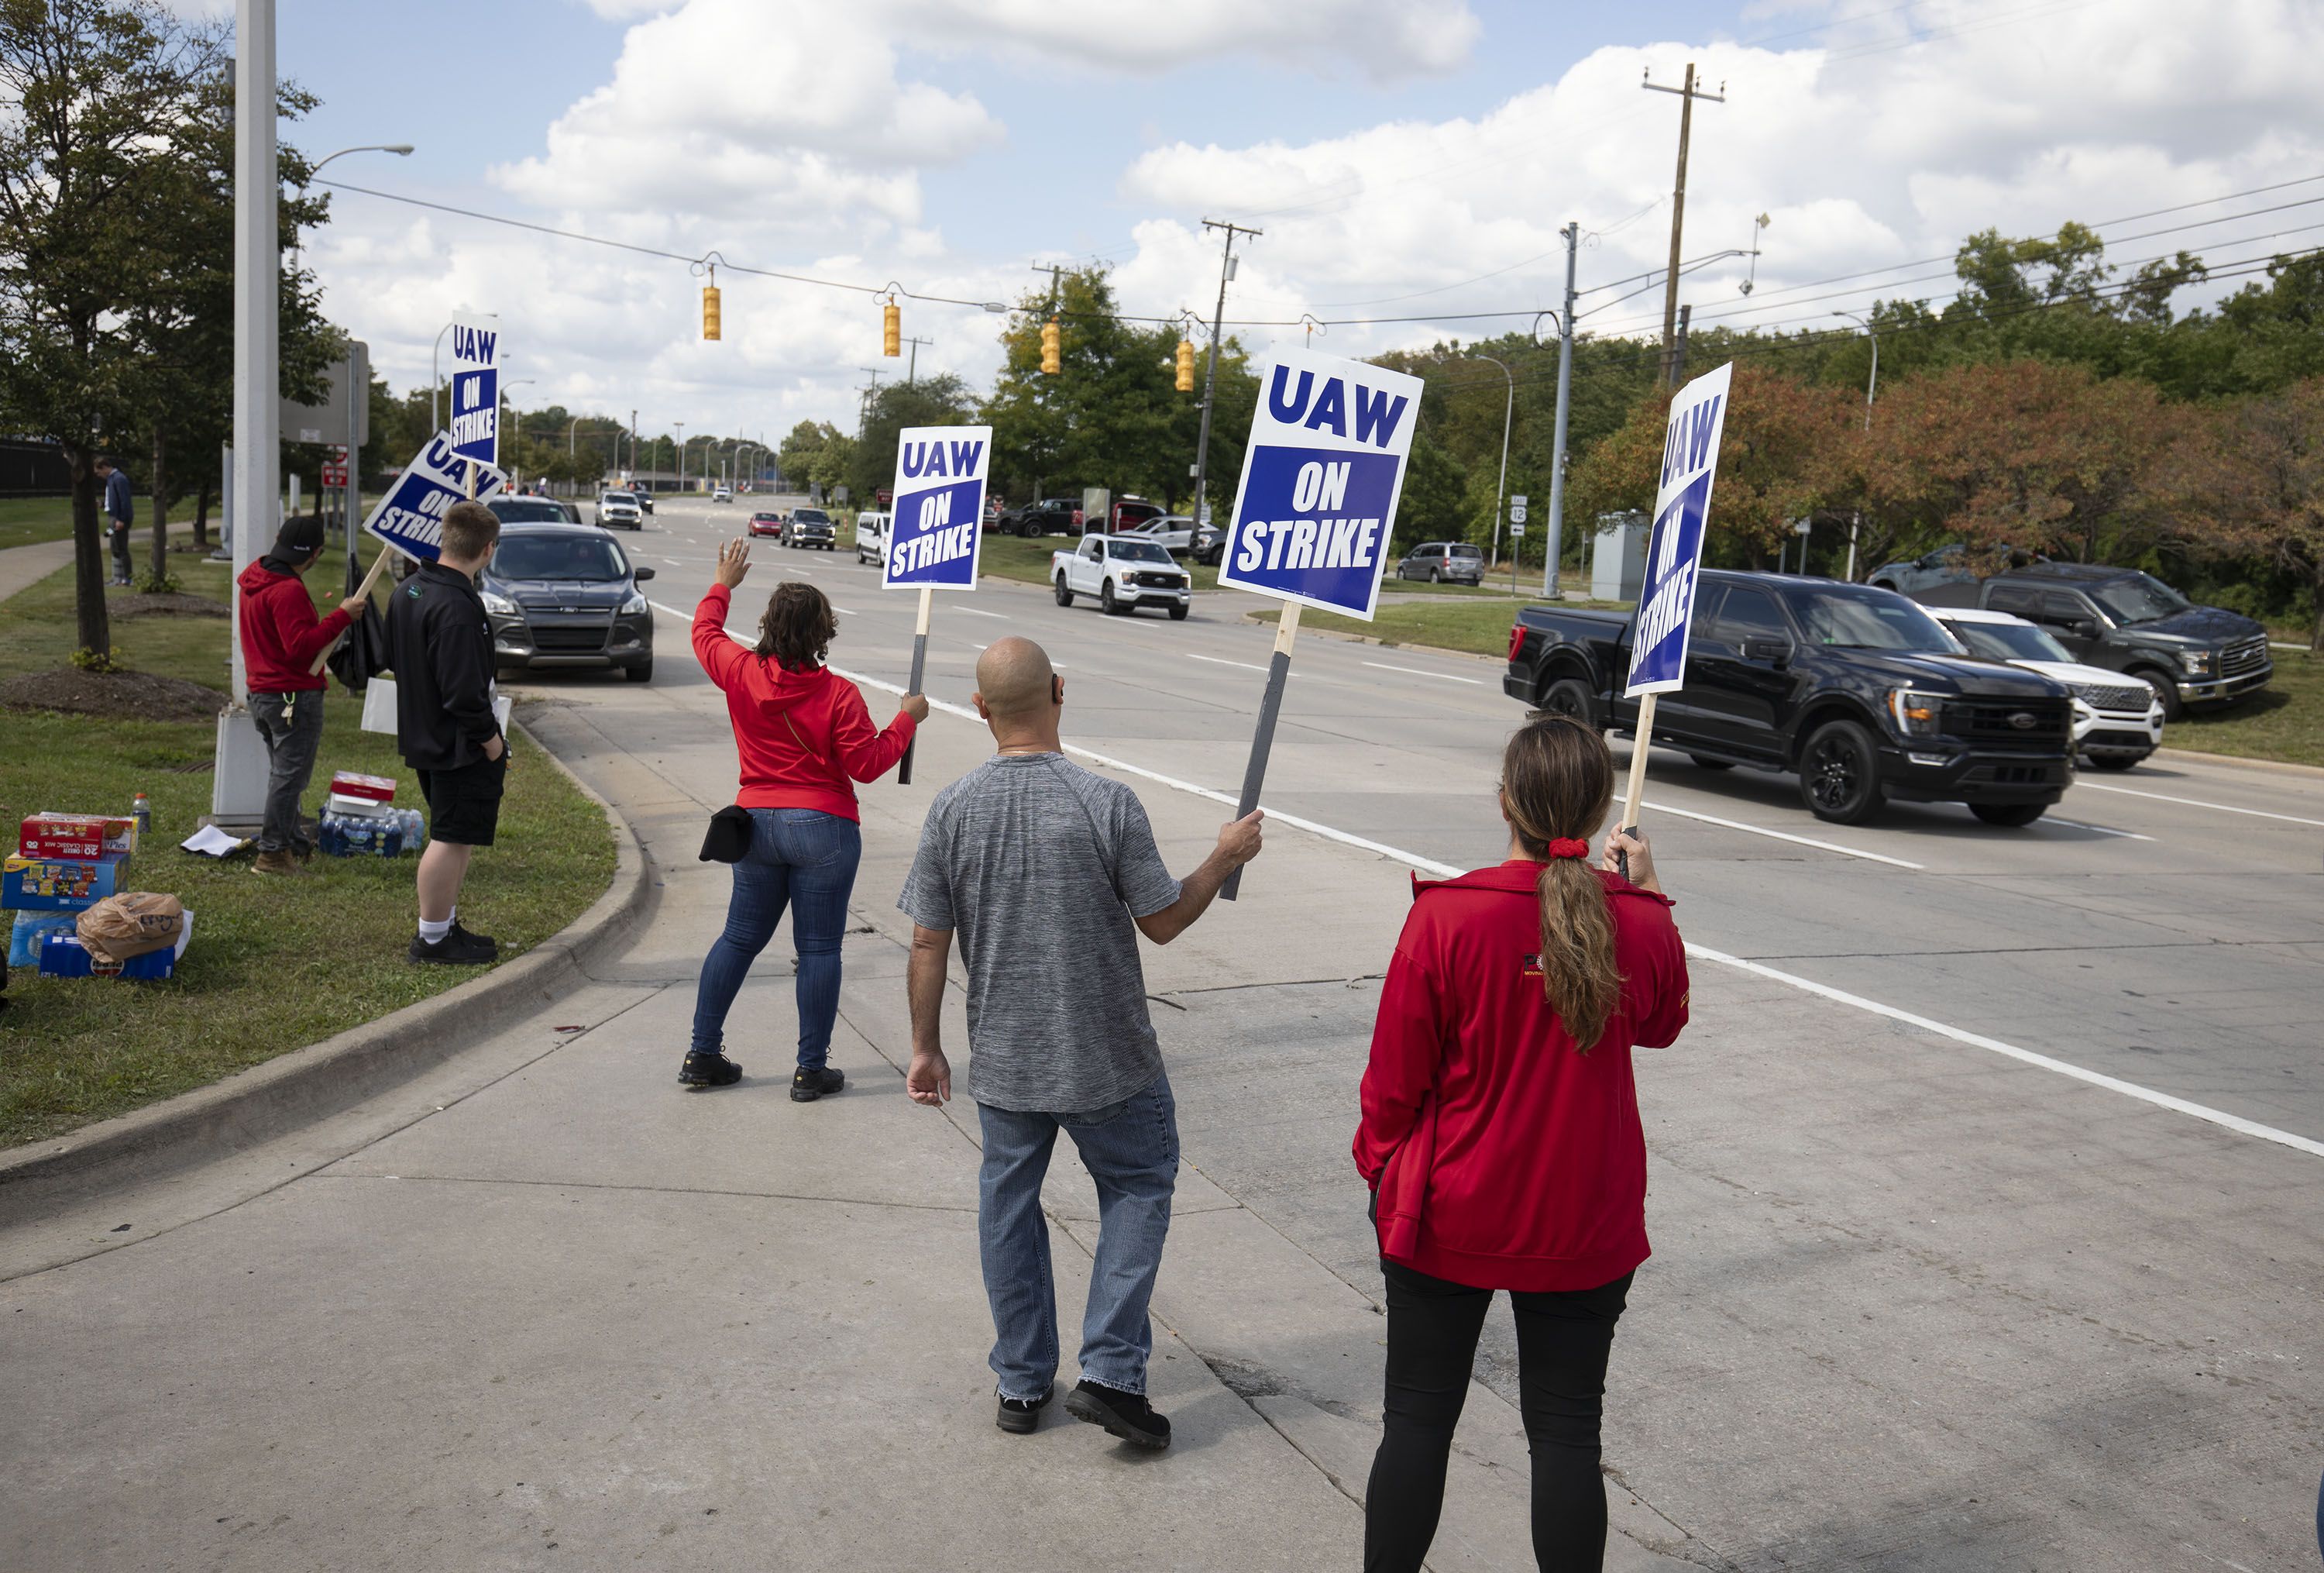 UAW members striking near a Ford assembly plant in Wayne, Michigan, on Sept. 15.